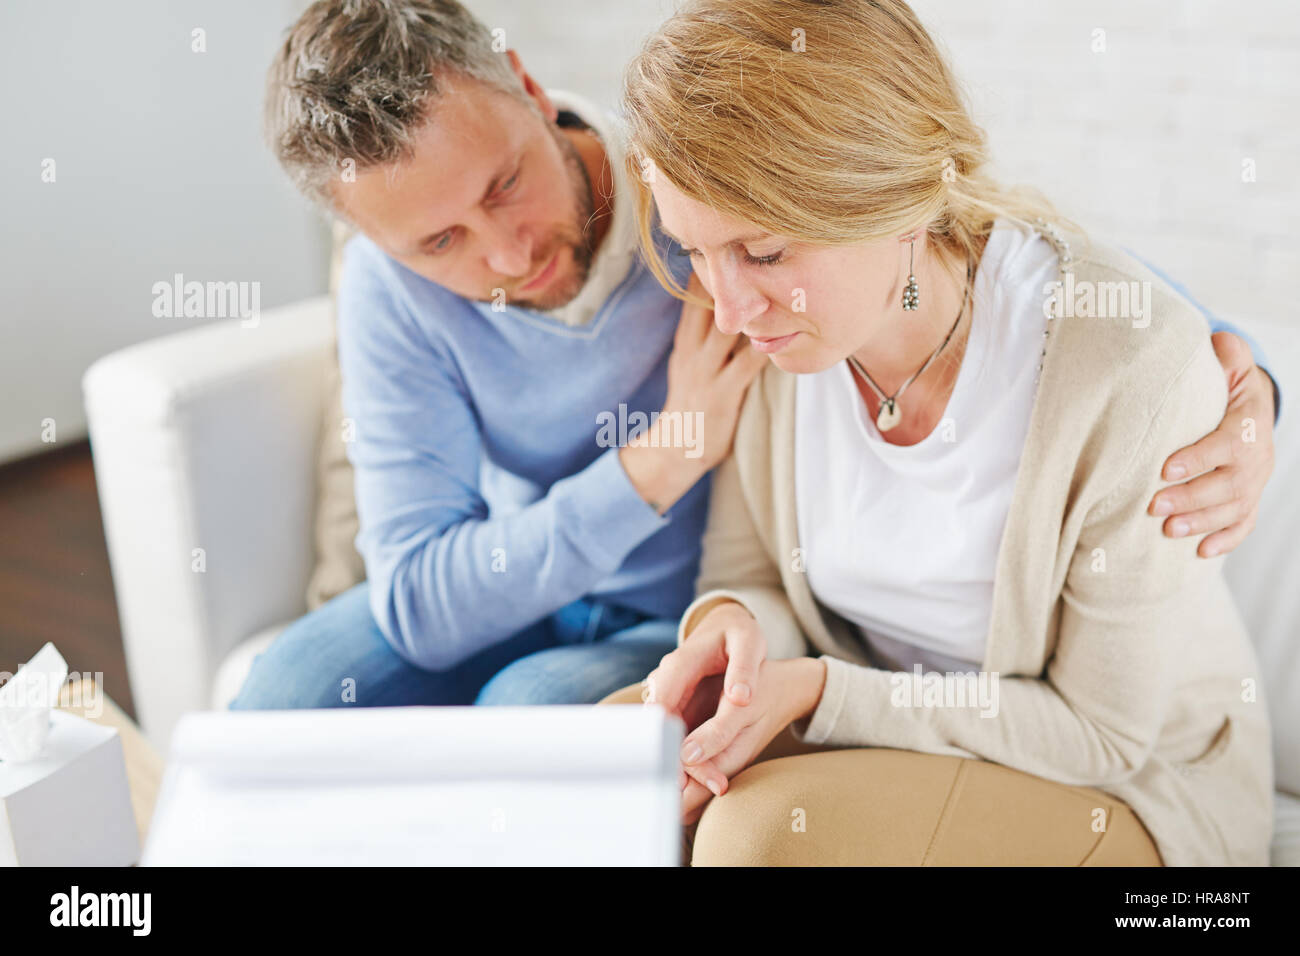 Upset blond-haired woman with tears on her cheeks sitting next to her psychologist while he trying to comfort her Stock Photo